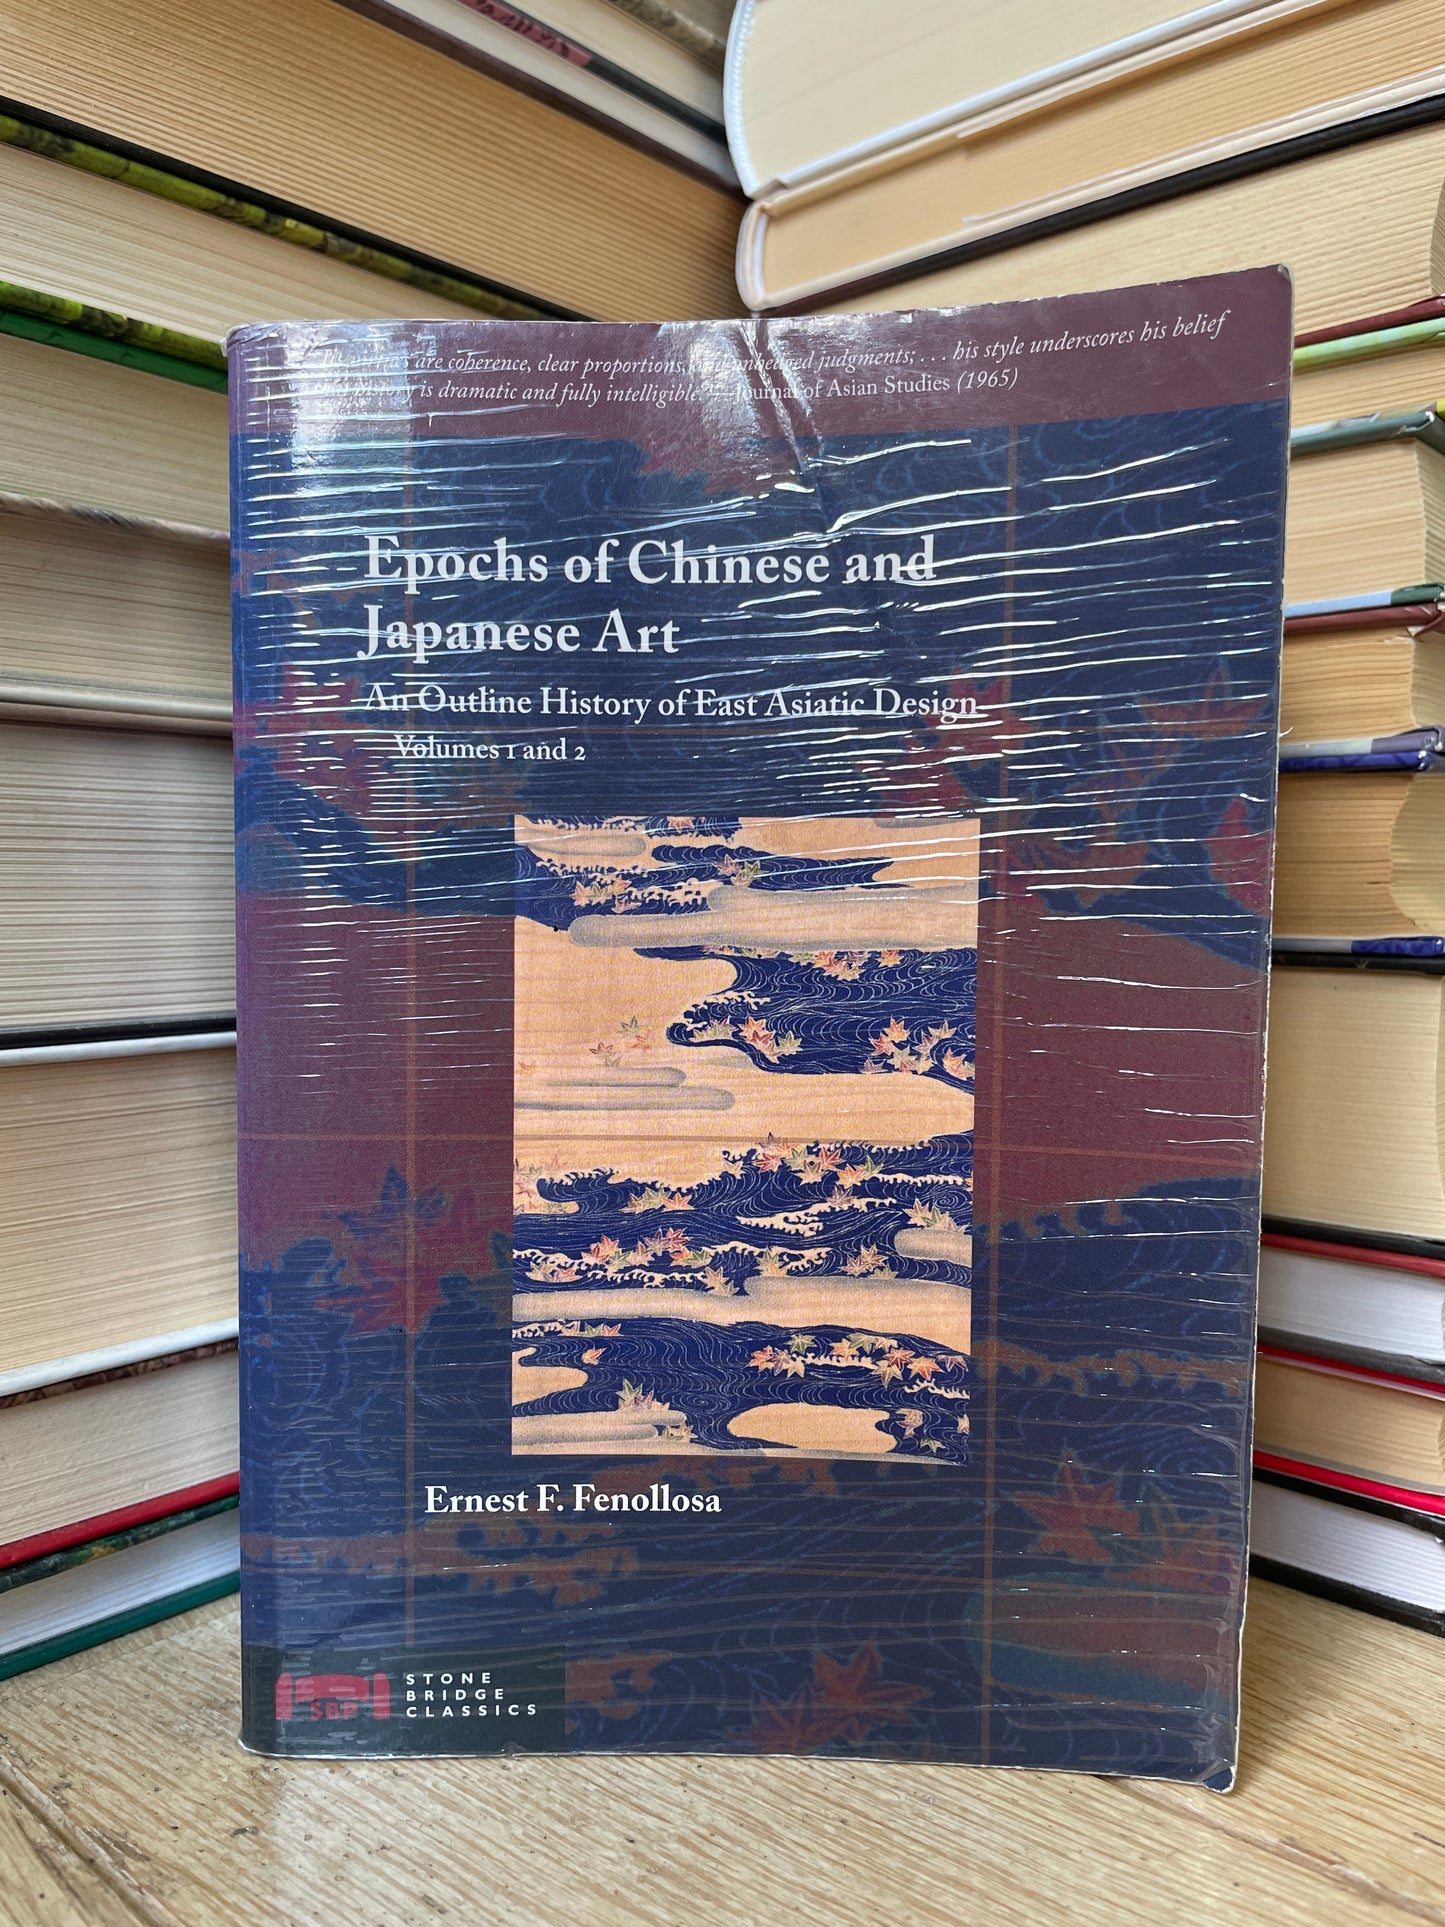 Ernest F. Fenollosa - Epochs of Chinese and Japanese Art